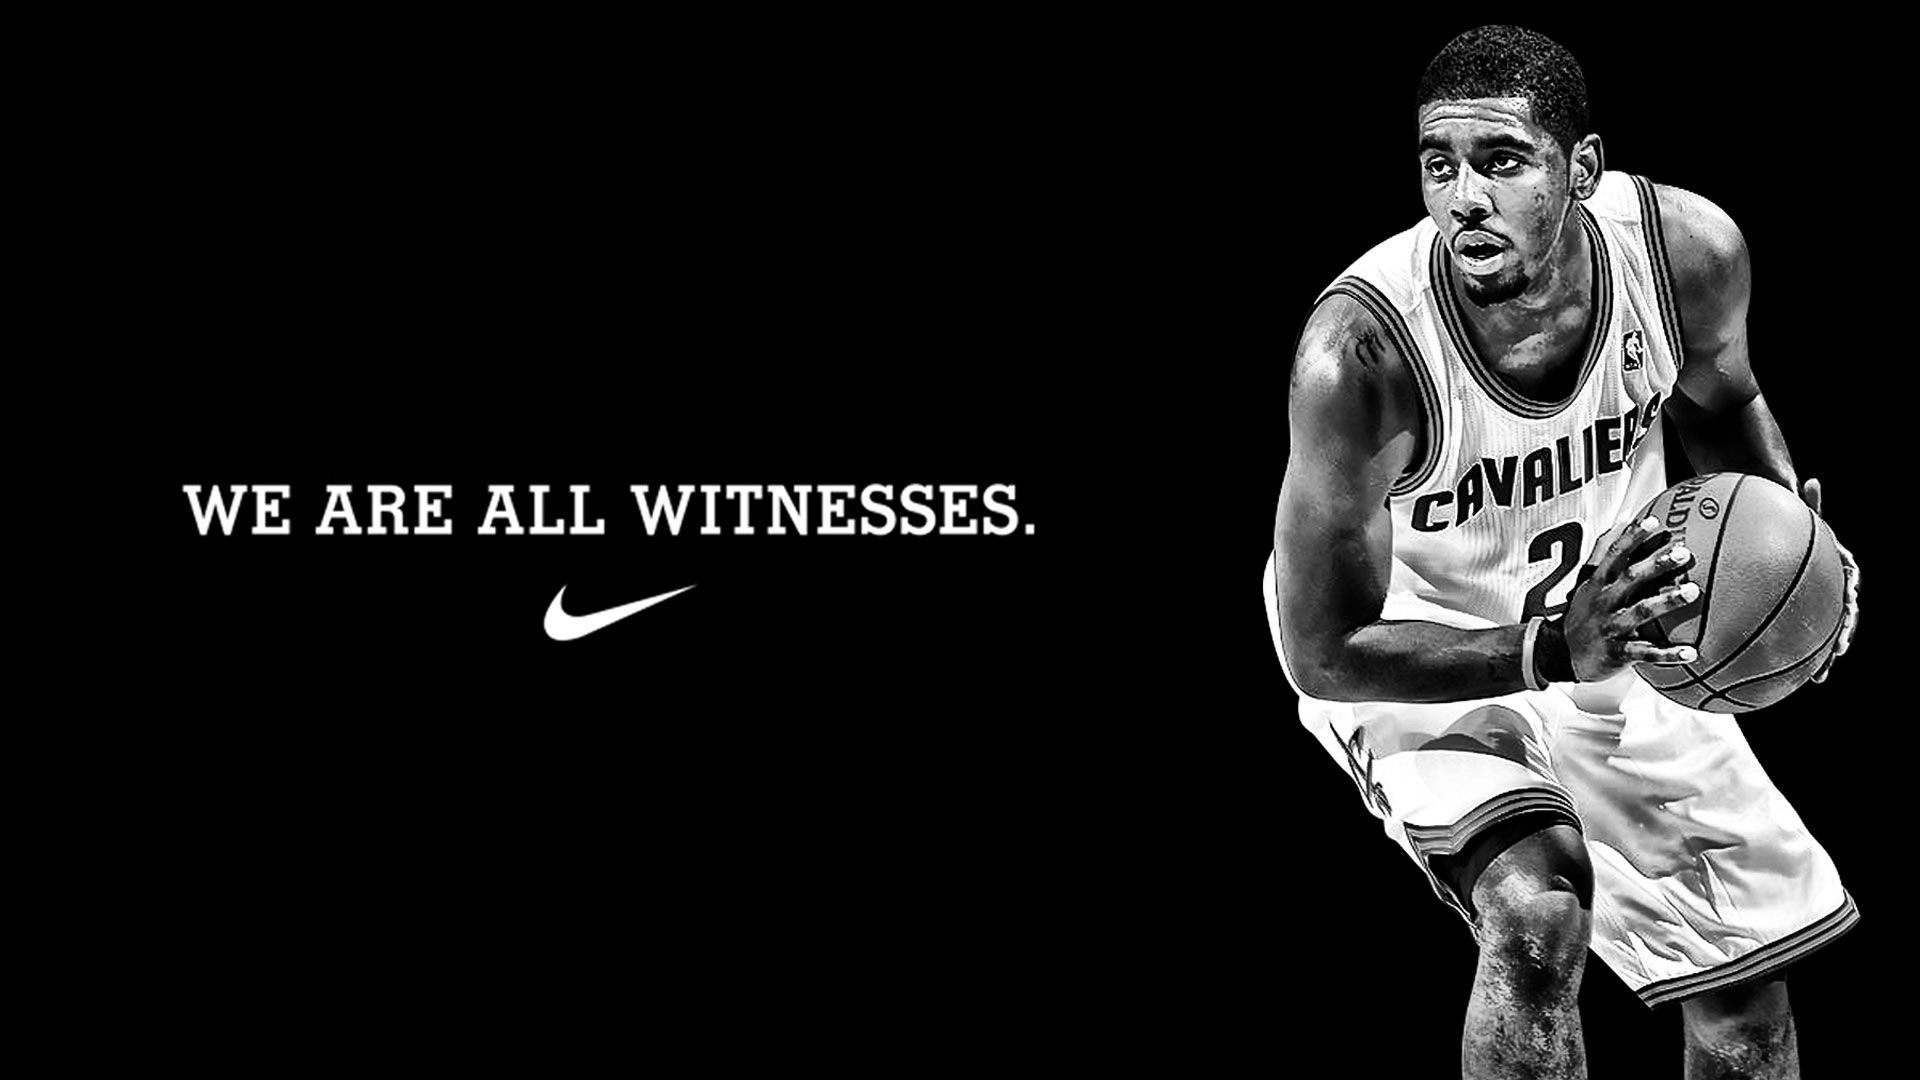 kyrie irving cavs Search. Kyrie irving